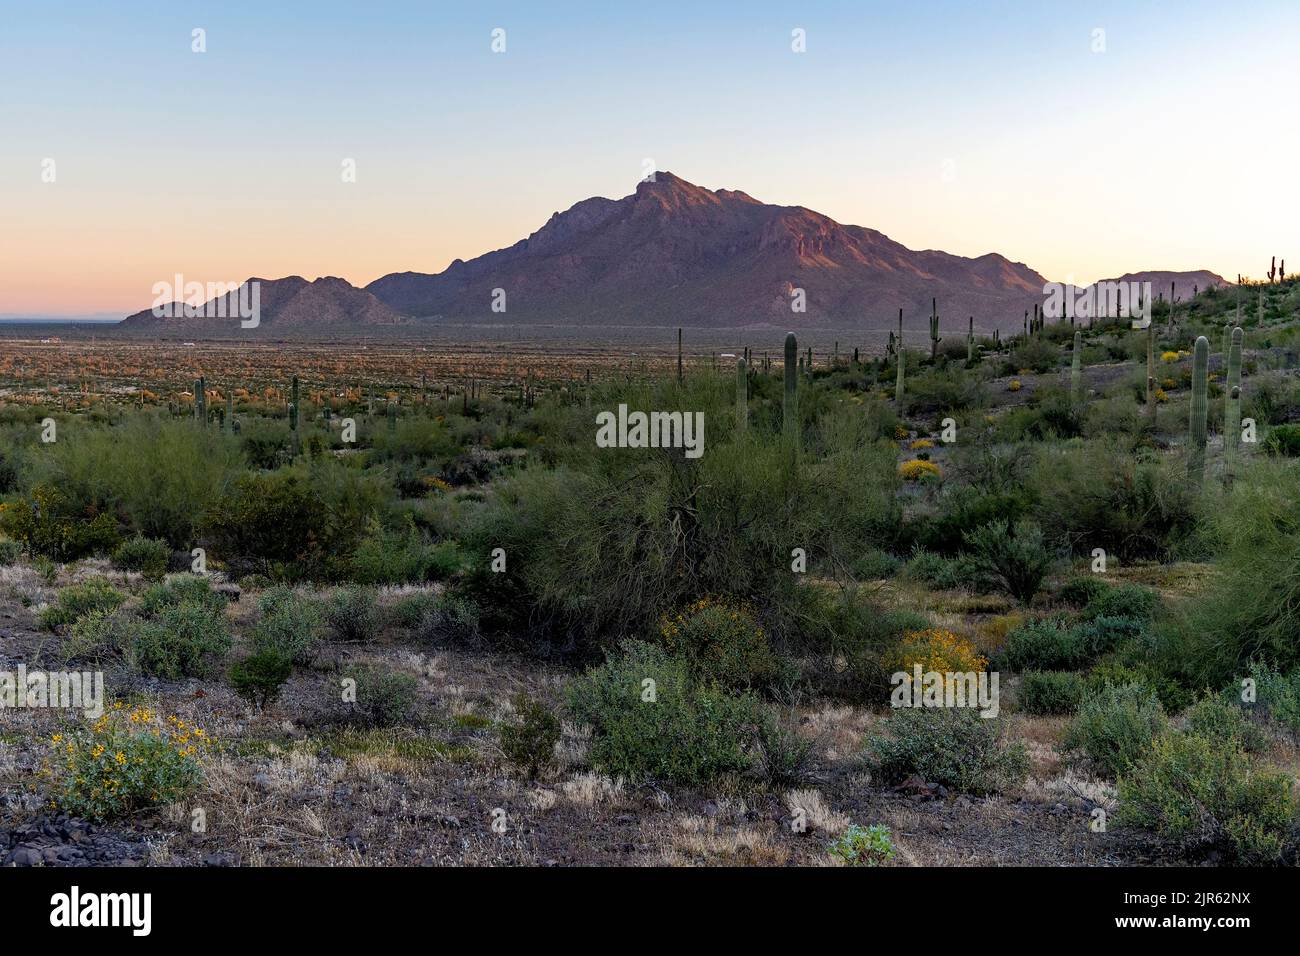 Morning scene from Picacho Peak State Park with cacti and and other desert shrubs. In the background is Newman Peak. March 2020. Stock Photo